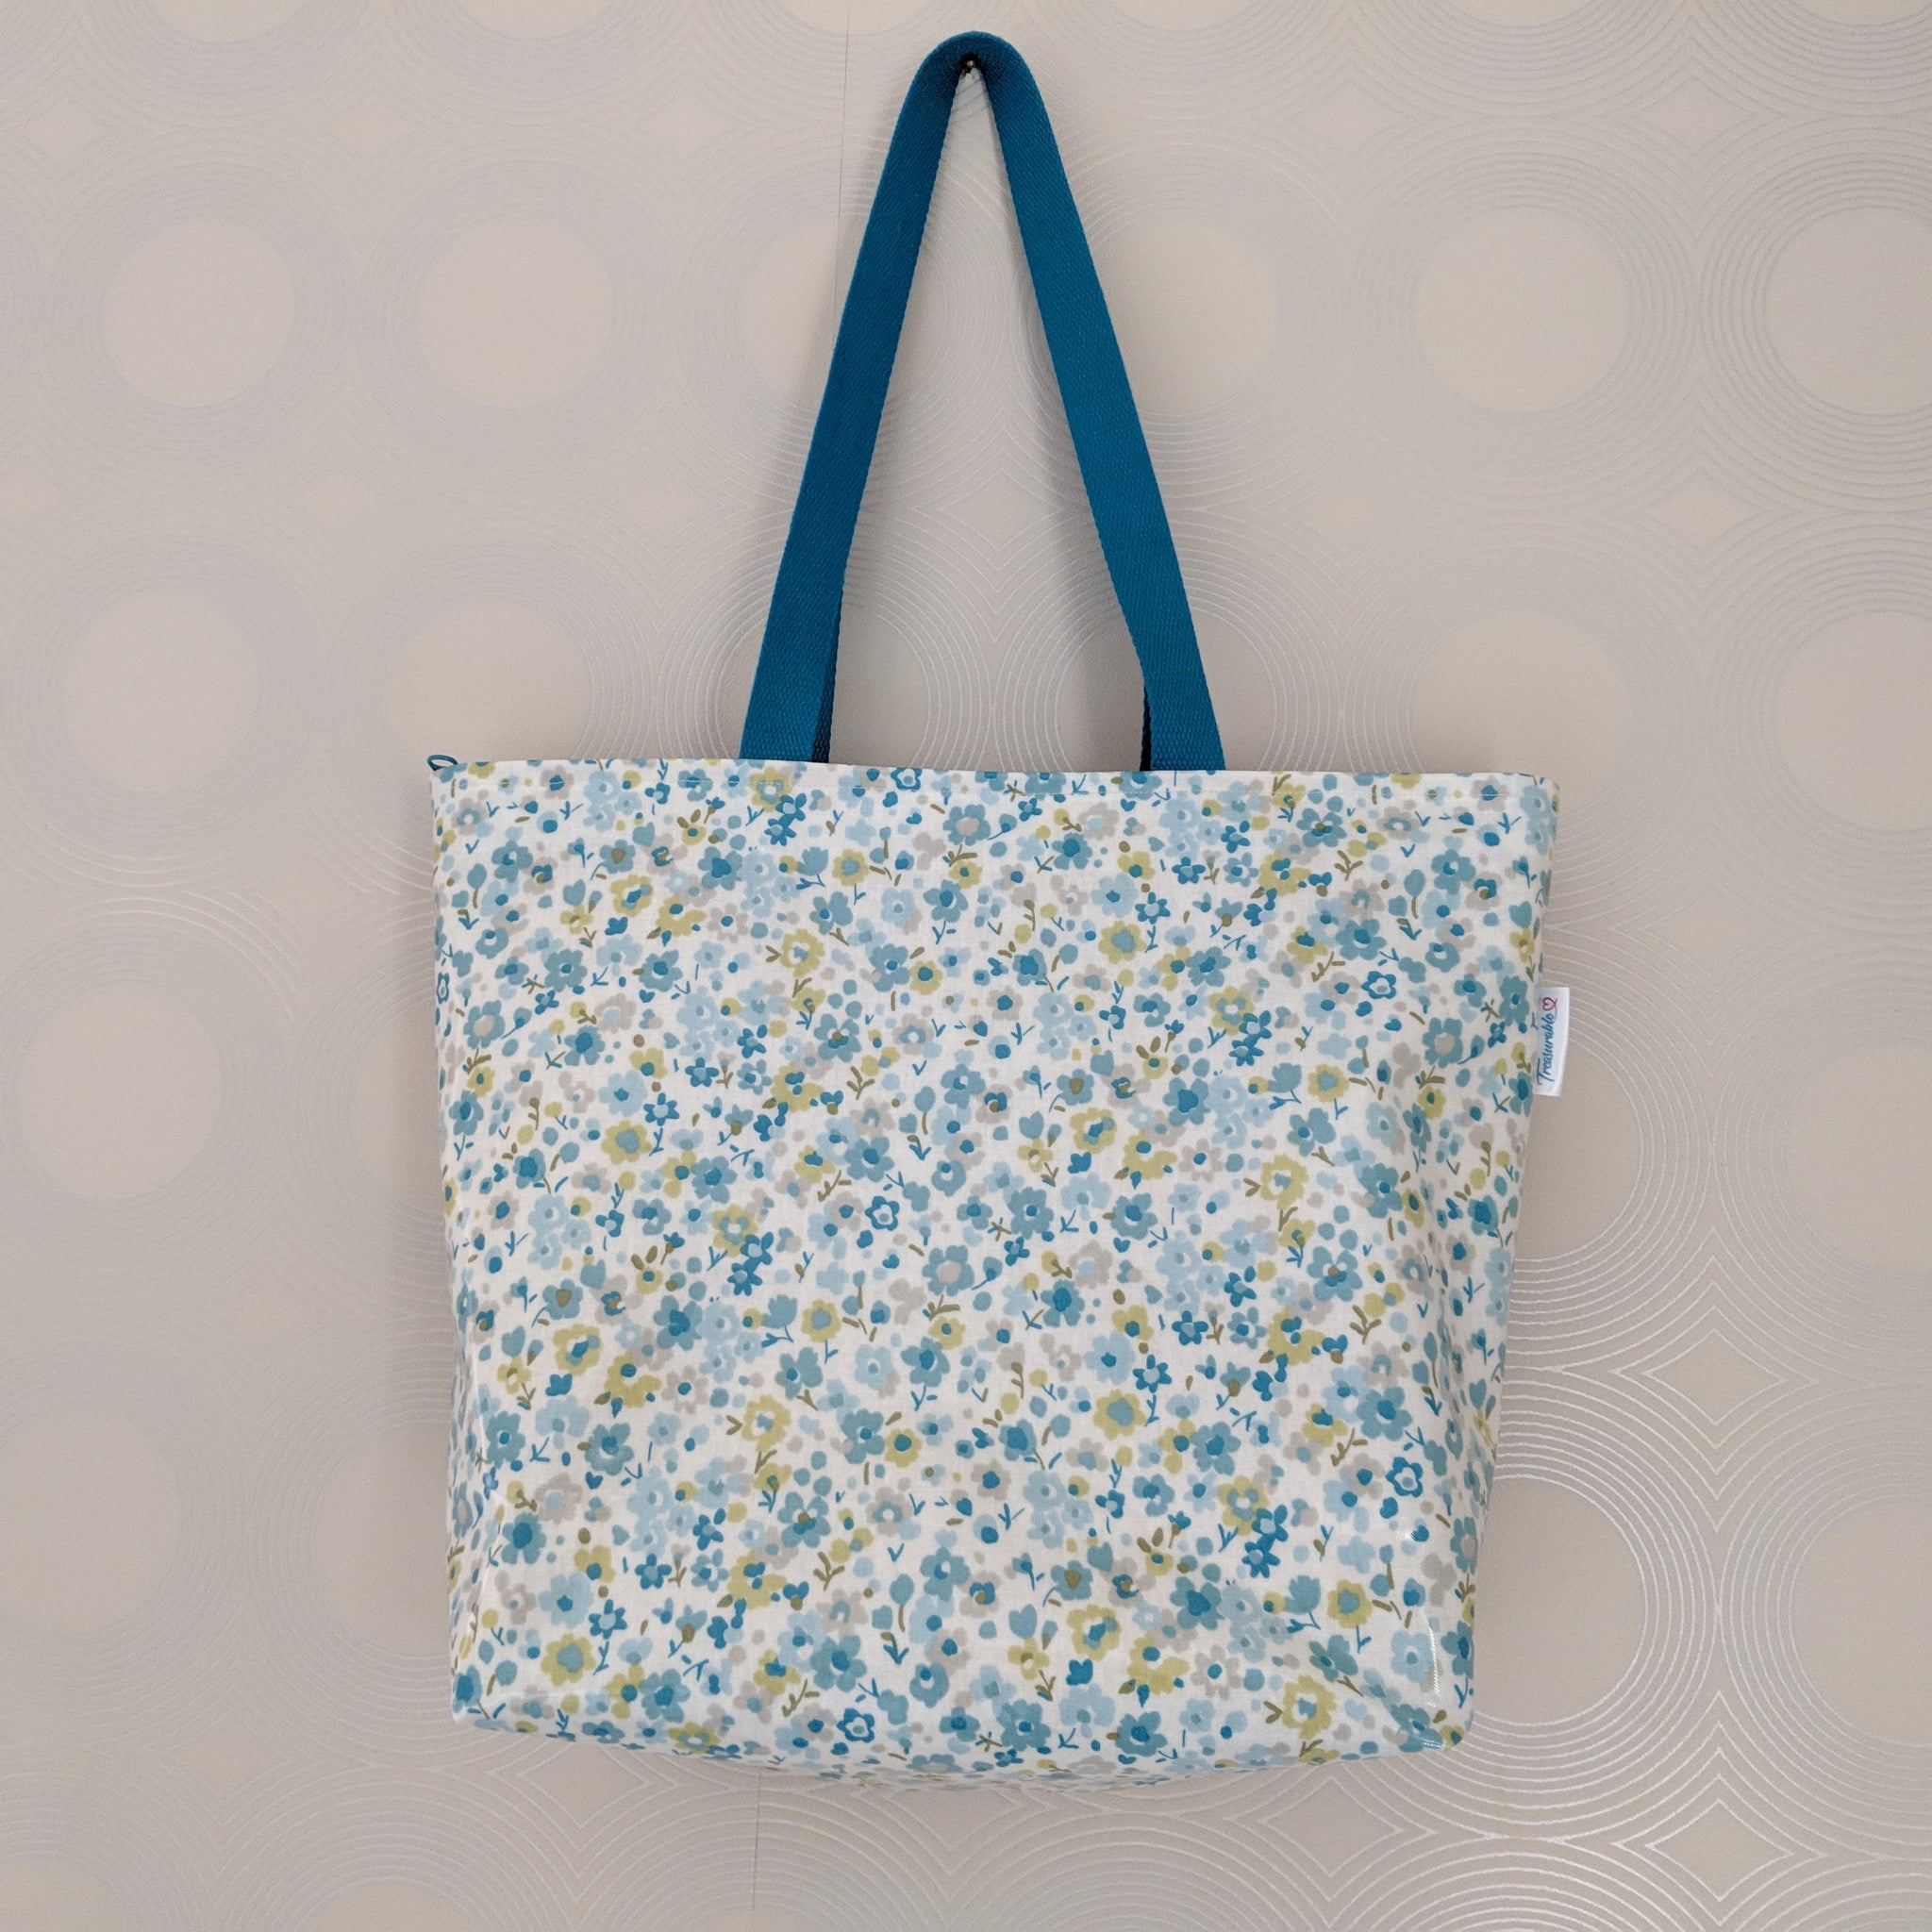 Large Teal Floral Oilcloth Shoulder Bag with Teal Cotton Webbing Handles and Recessed Zip